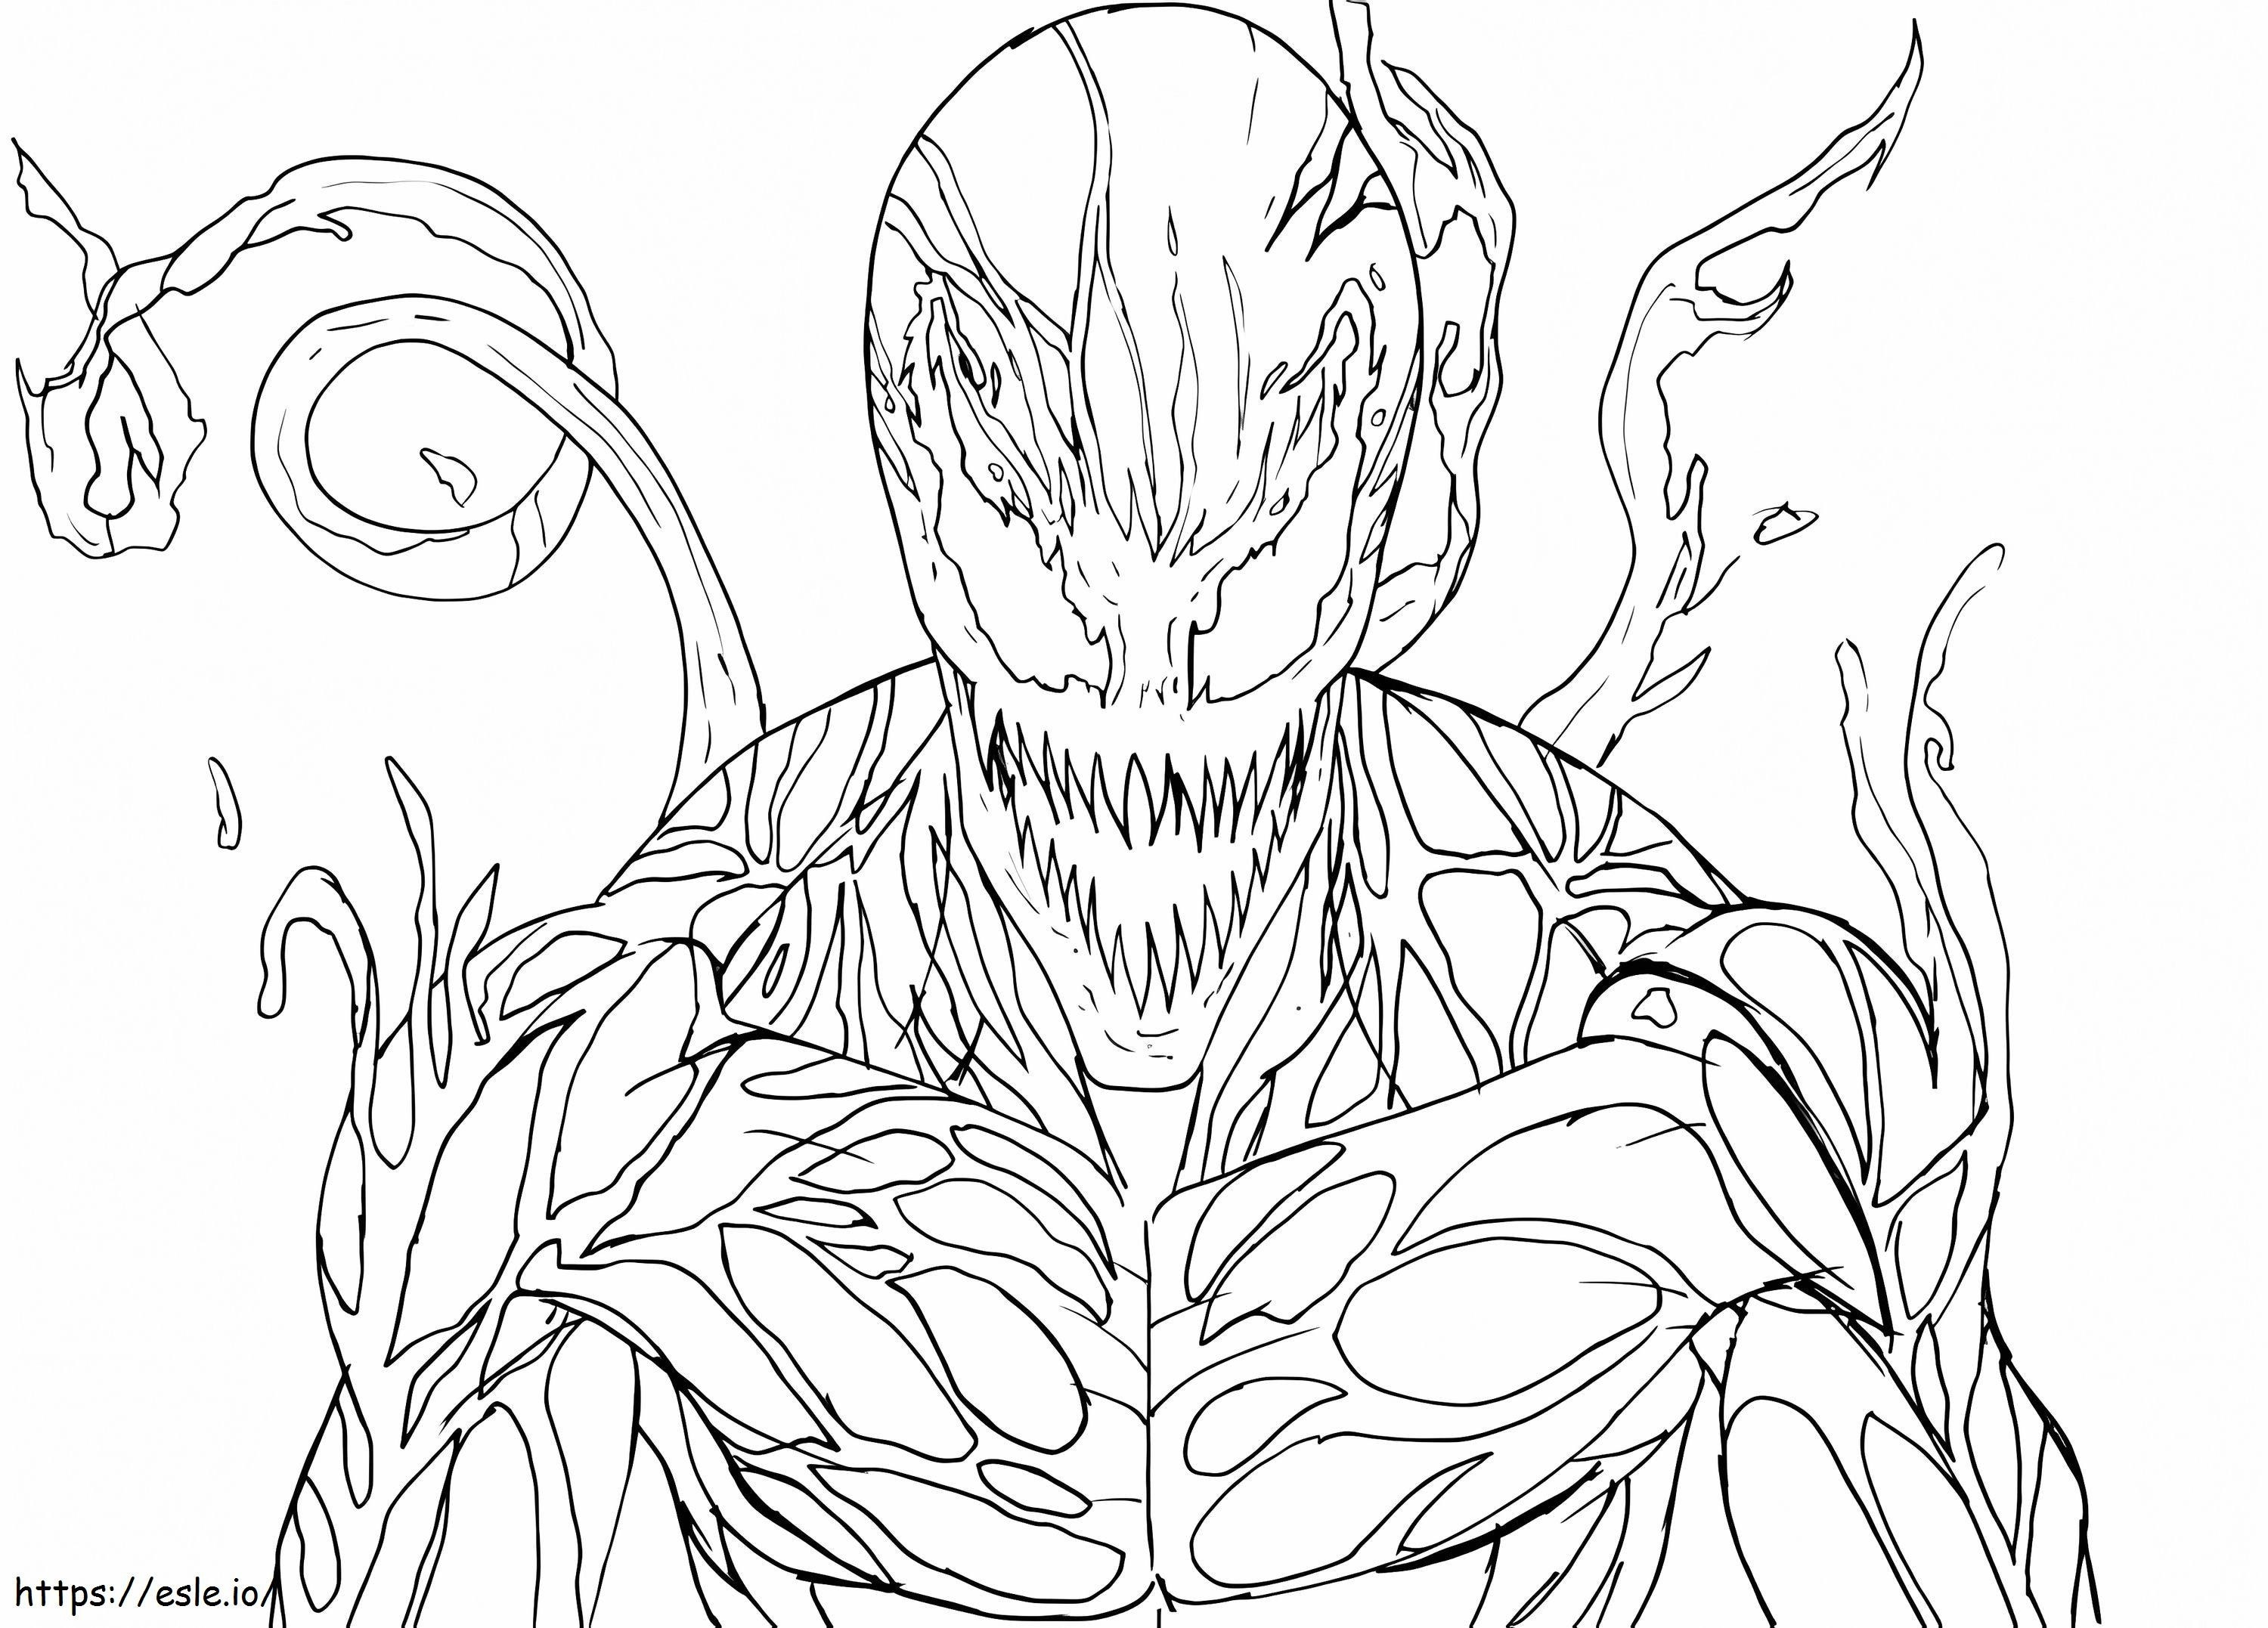 Monster Carnage coloring page